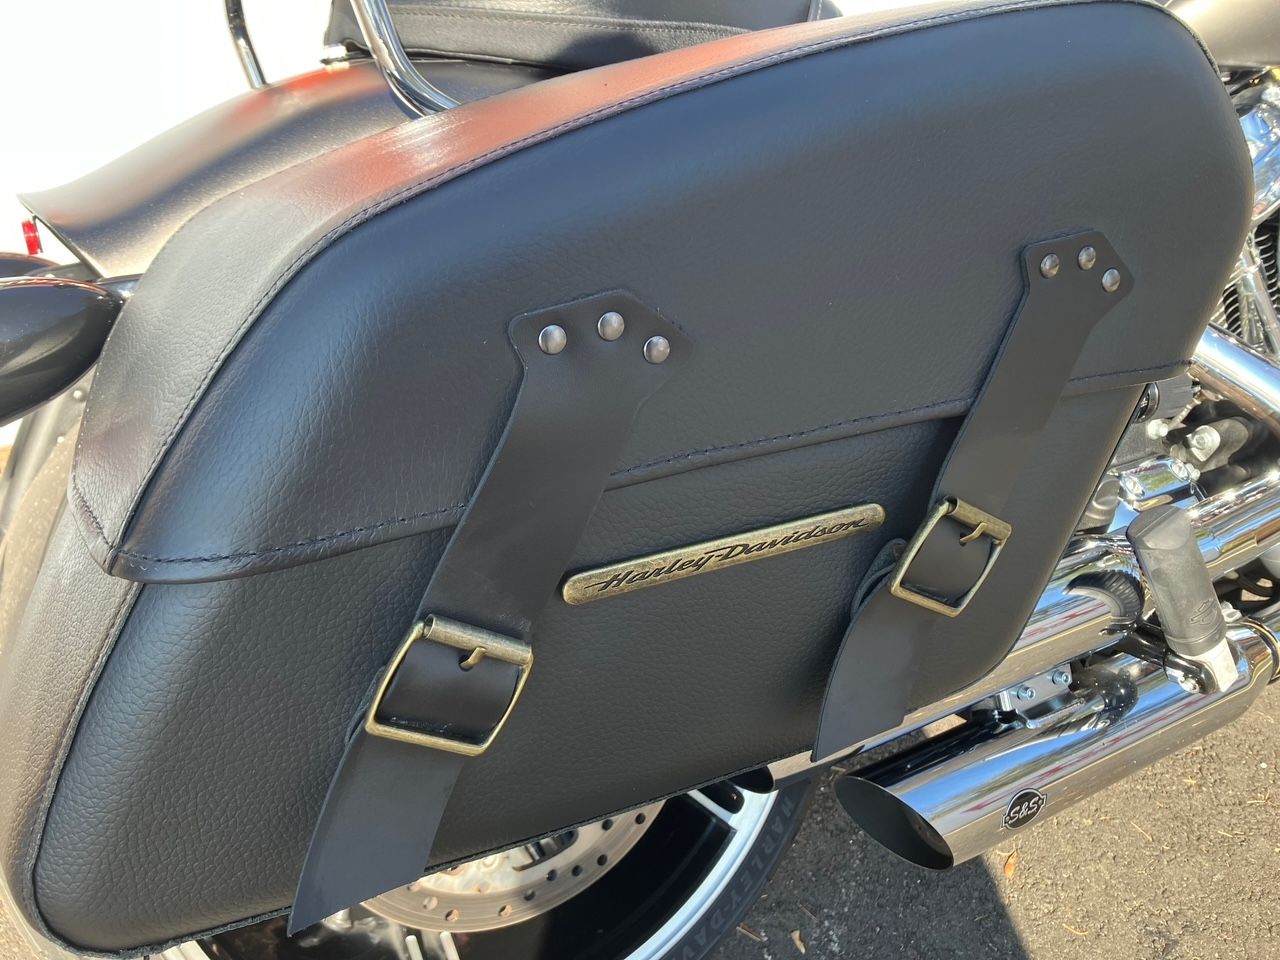 2020 Harley-Davidson BREAKOUT in West Long Branch, New Jersey - Photo 11